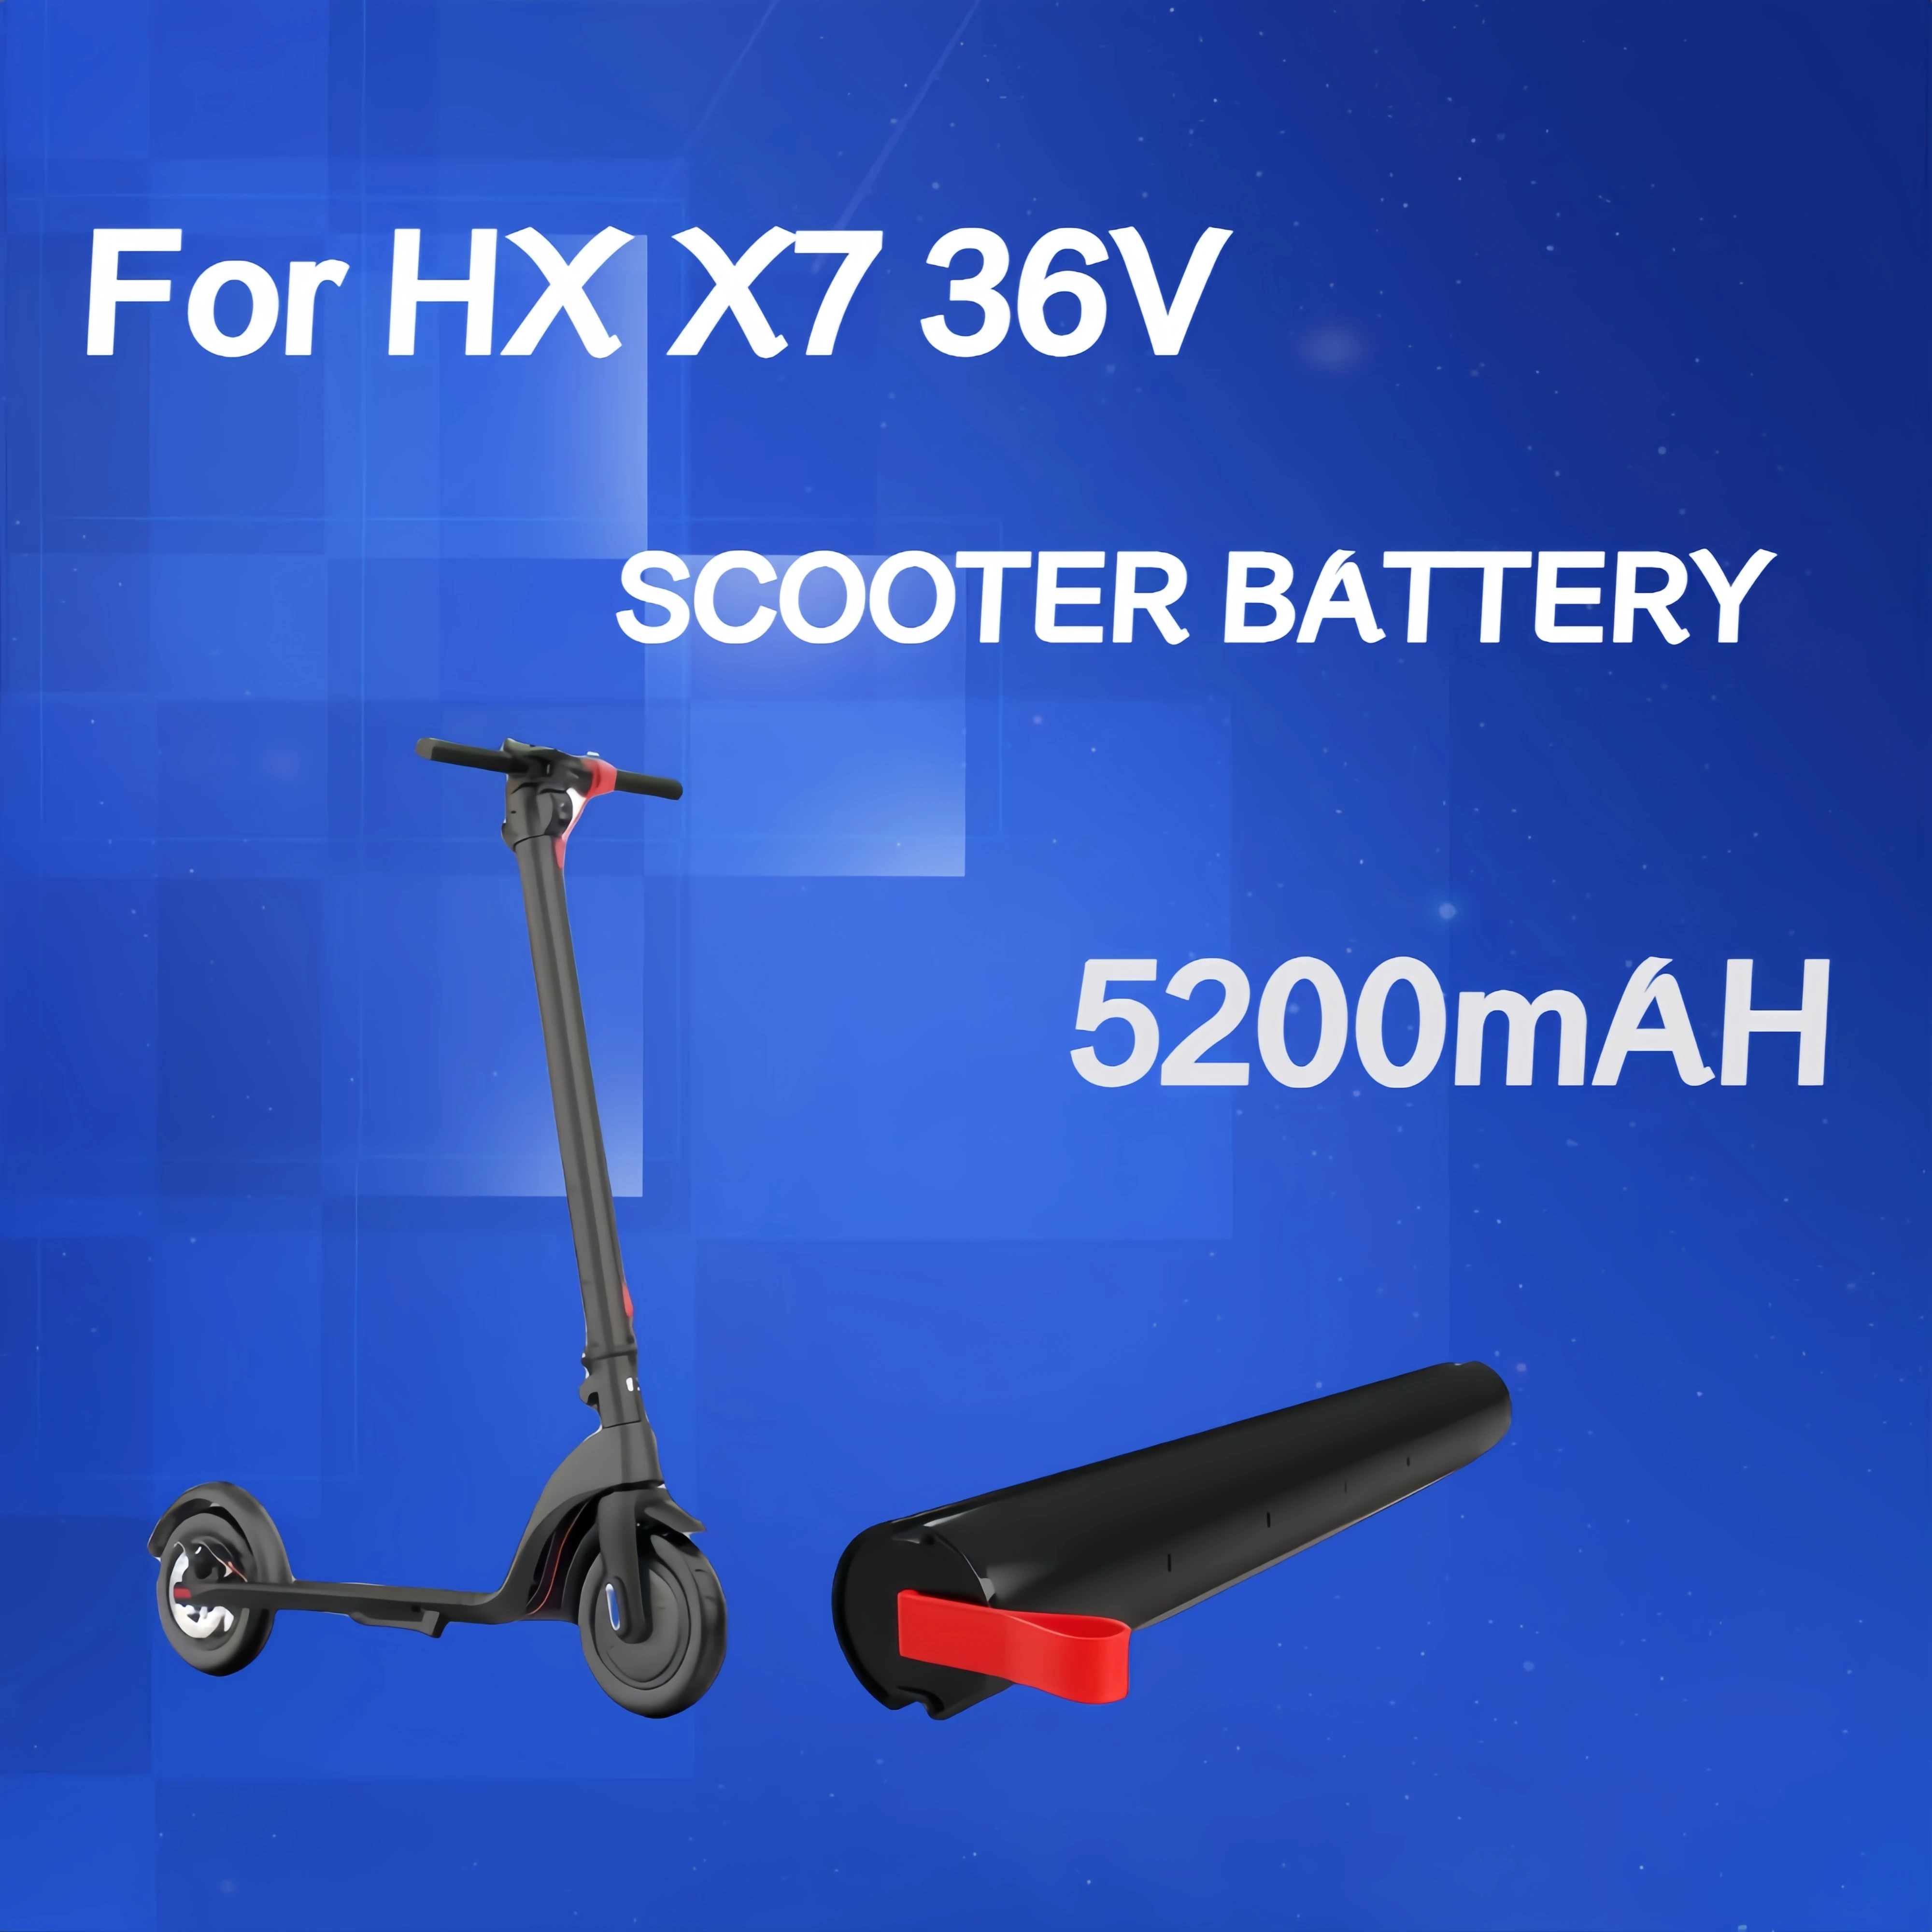 

36V 5200mAh X7 100% brand new foldable build in scooter battery, suitable for HX X7 scooters